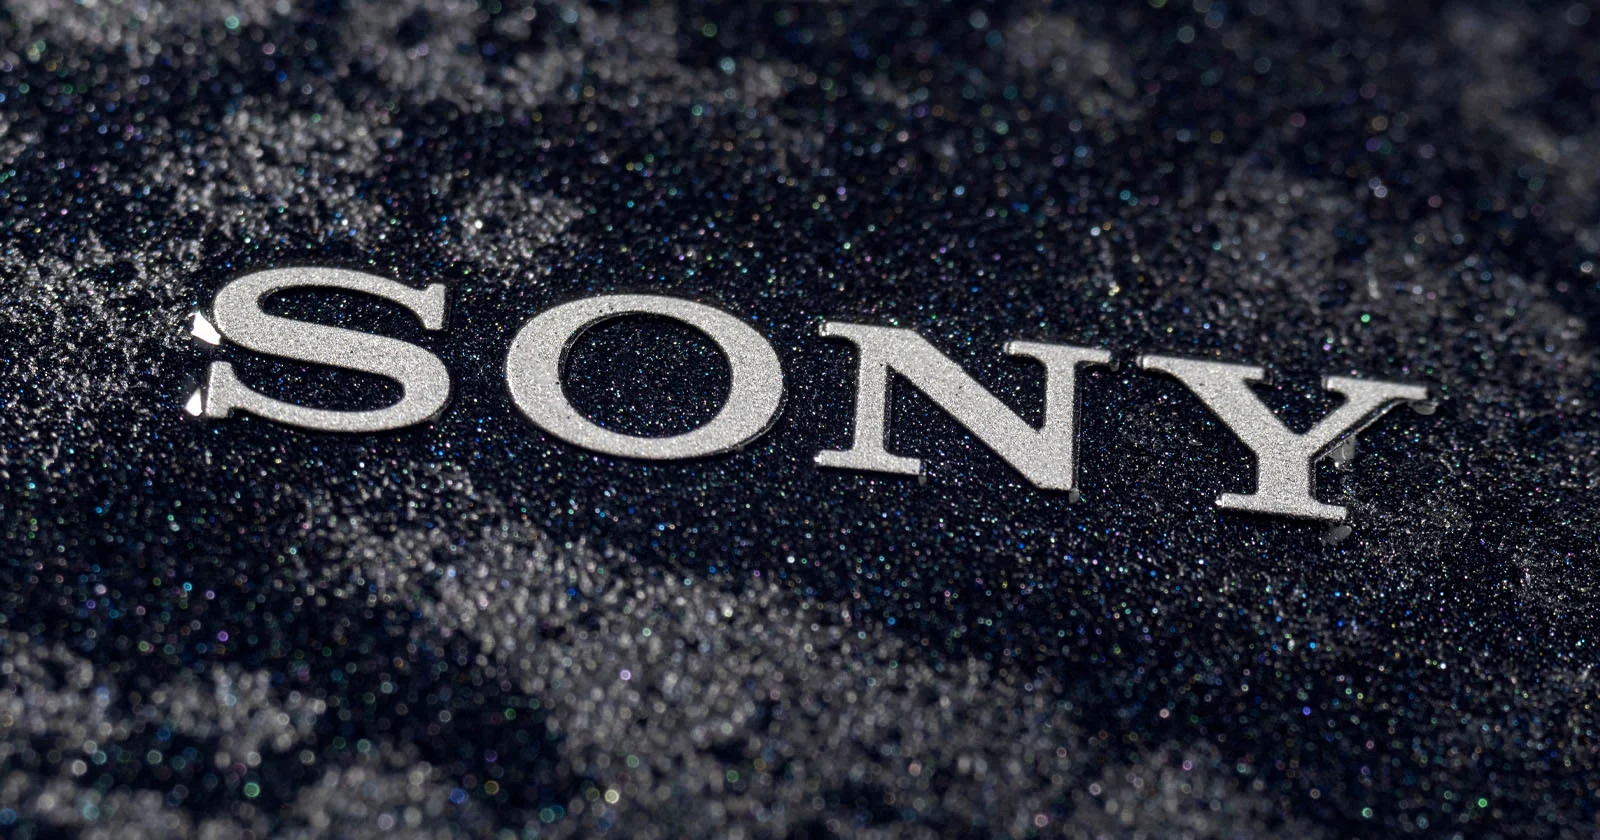 who are Sony's joint venture partners